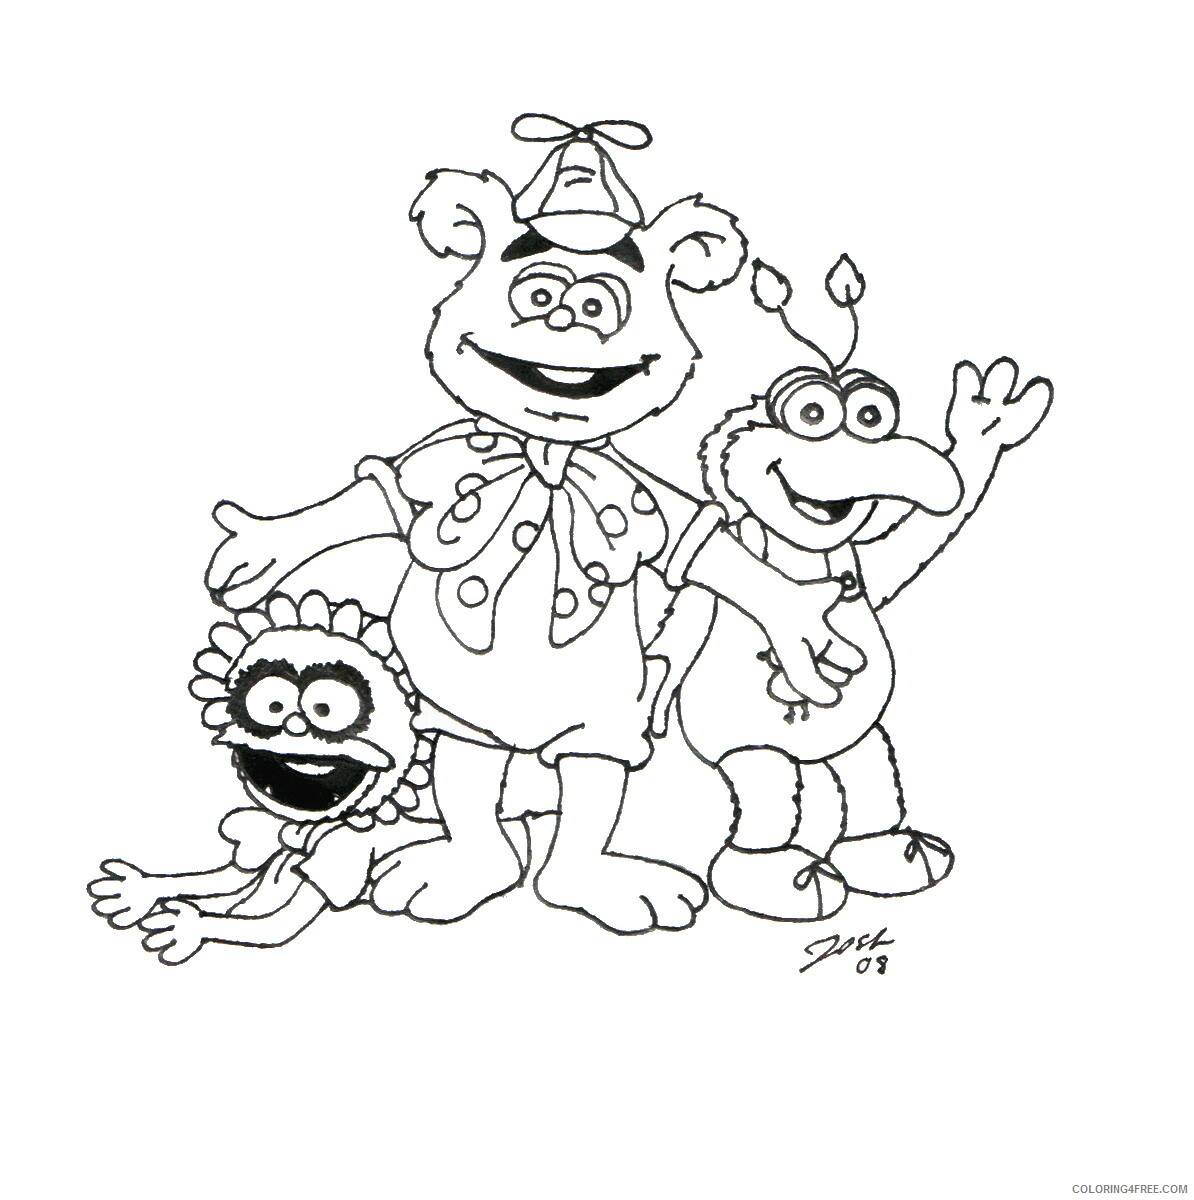 The Muppet Show Coloring Pages TV Film muppets_cl_09 Printable 2020 09368 Coloring4free